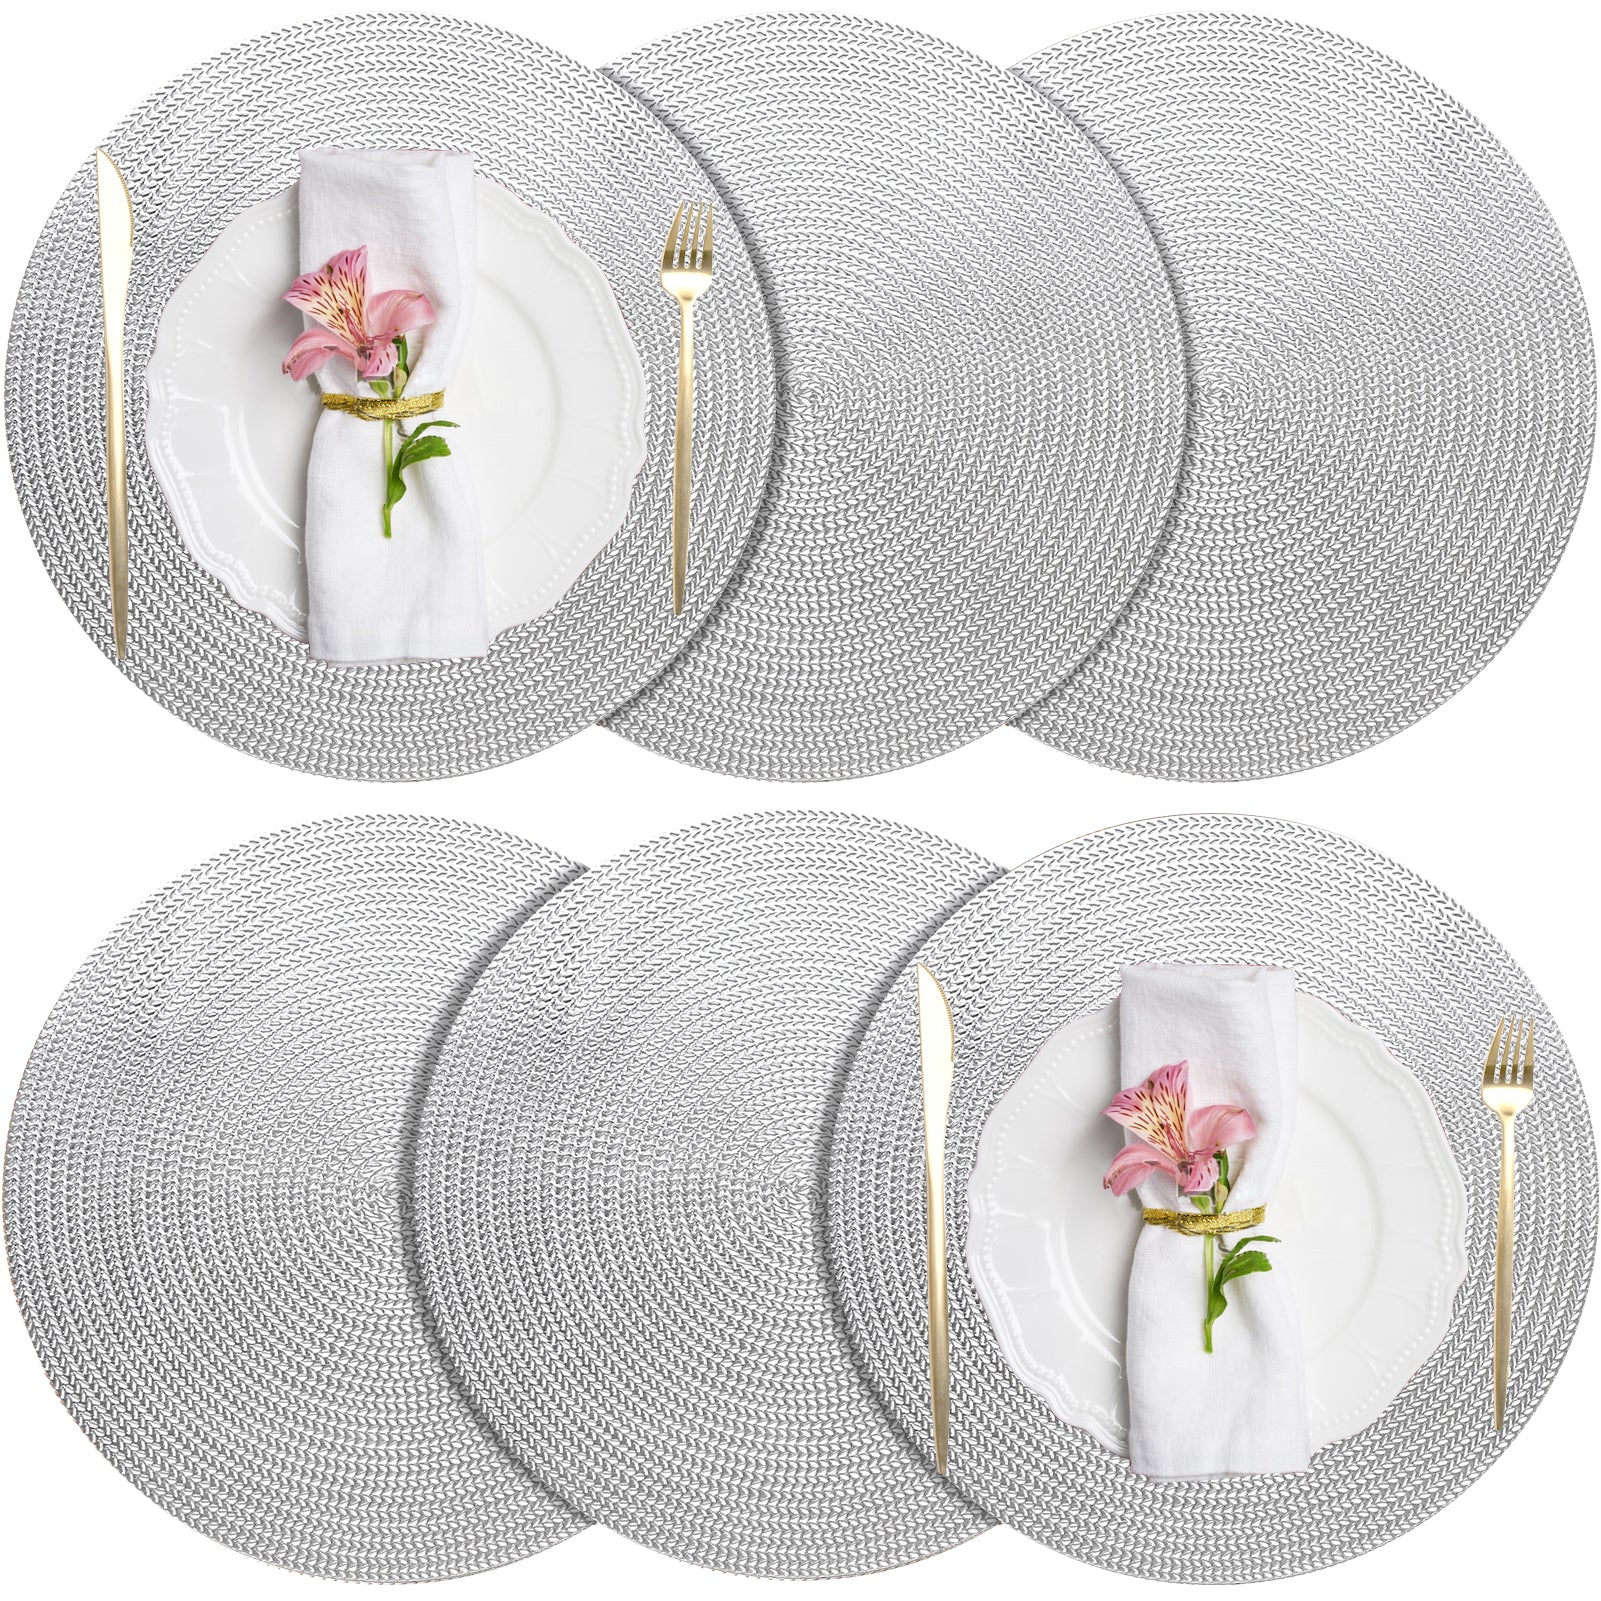 FYY Placemats, Round Placemats Set of 6 for Dining Table, Washable Round PVC Table Mats Durable Kitchen Table Mats, Set of 6